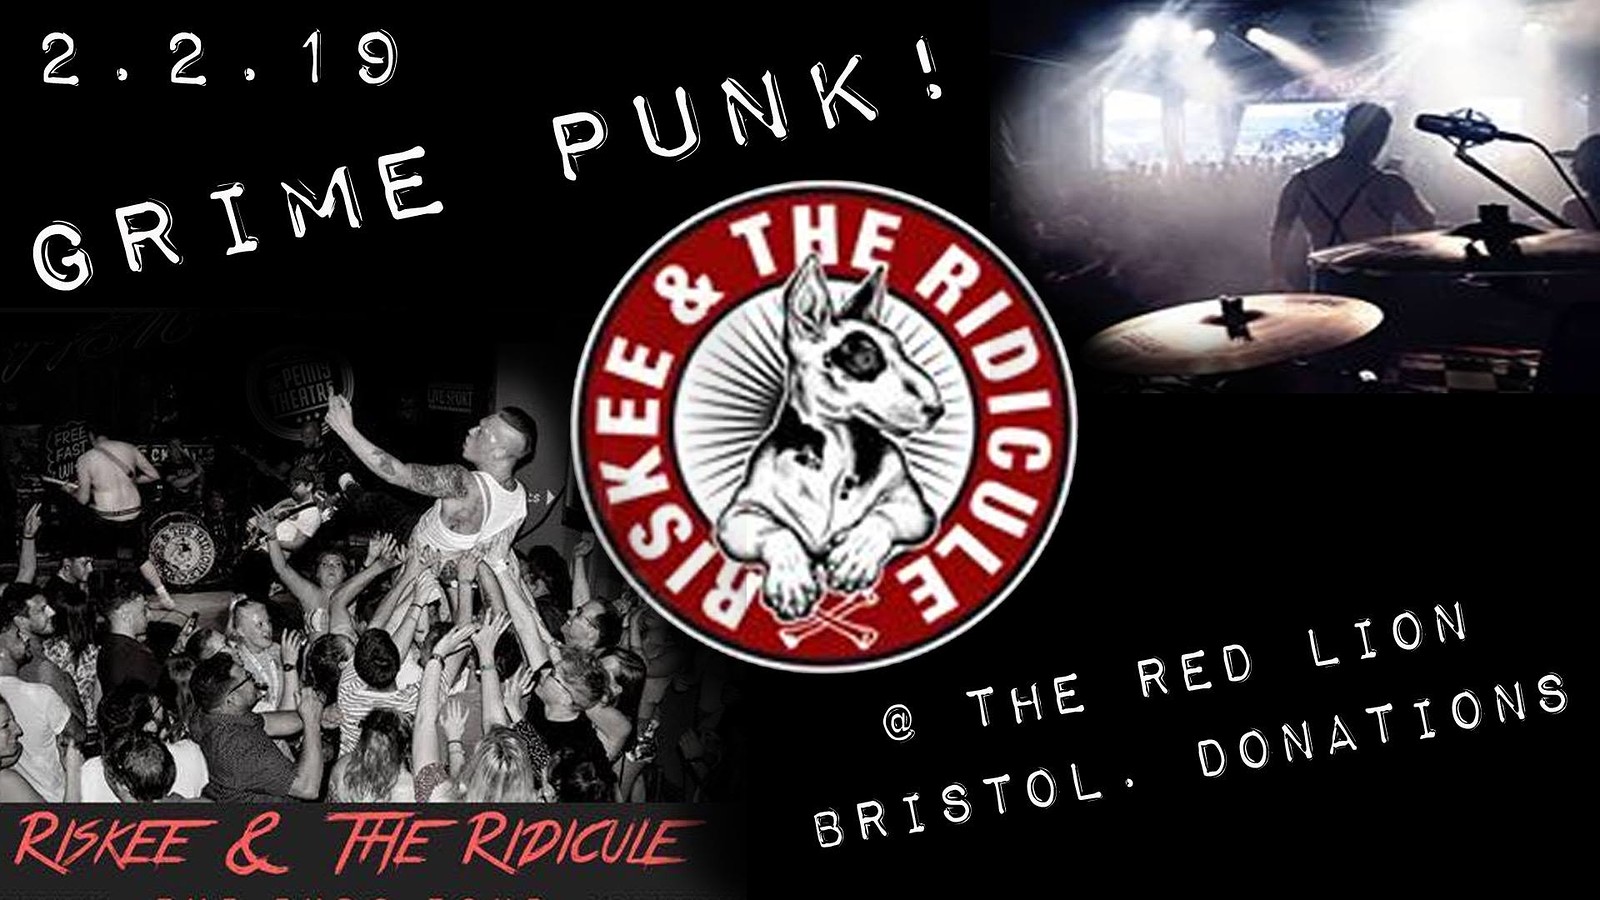 Riskee & the Ridicule, Public Order Act & more at the red lion